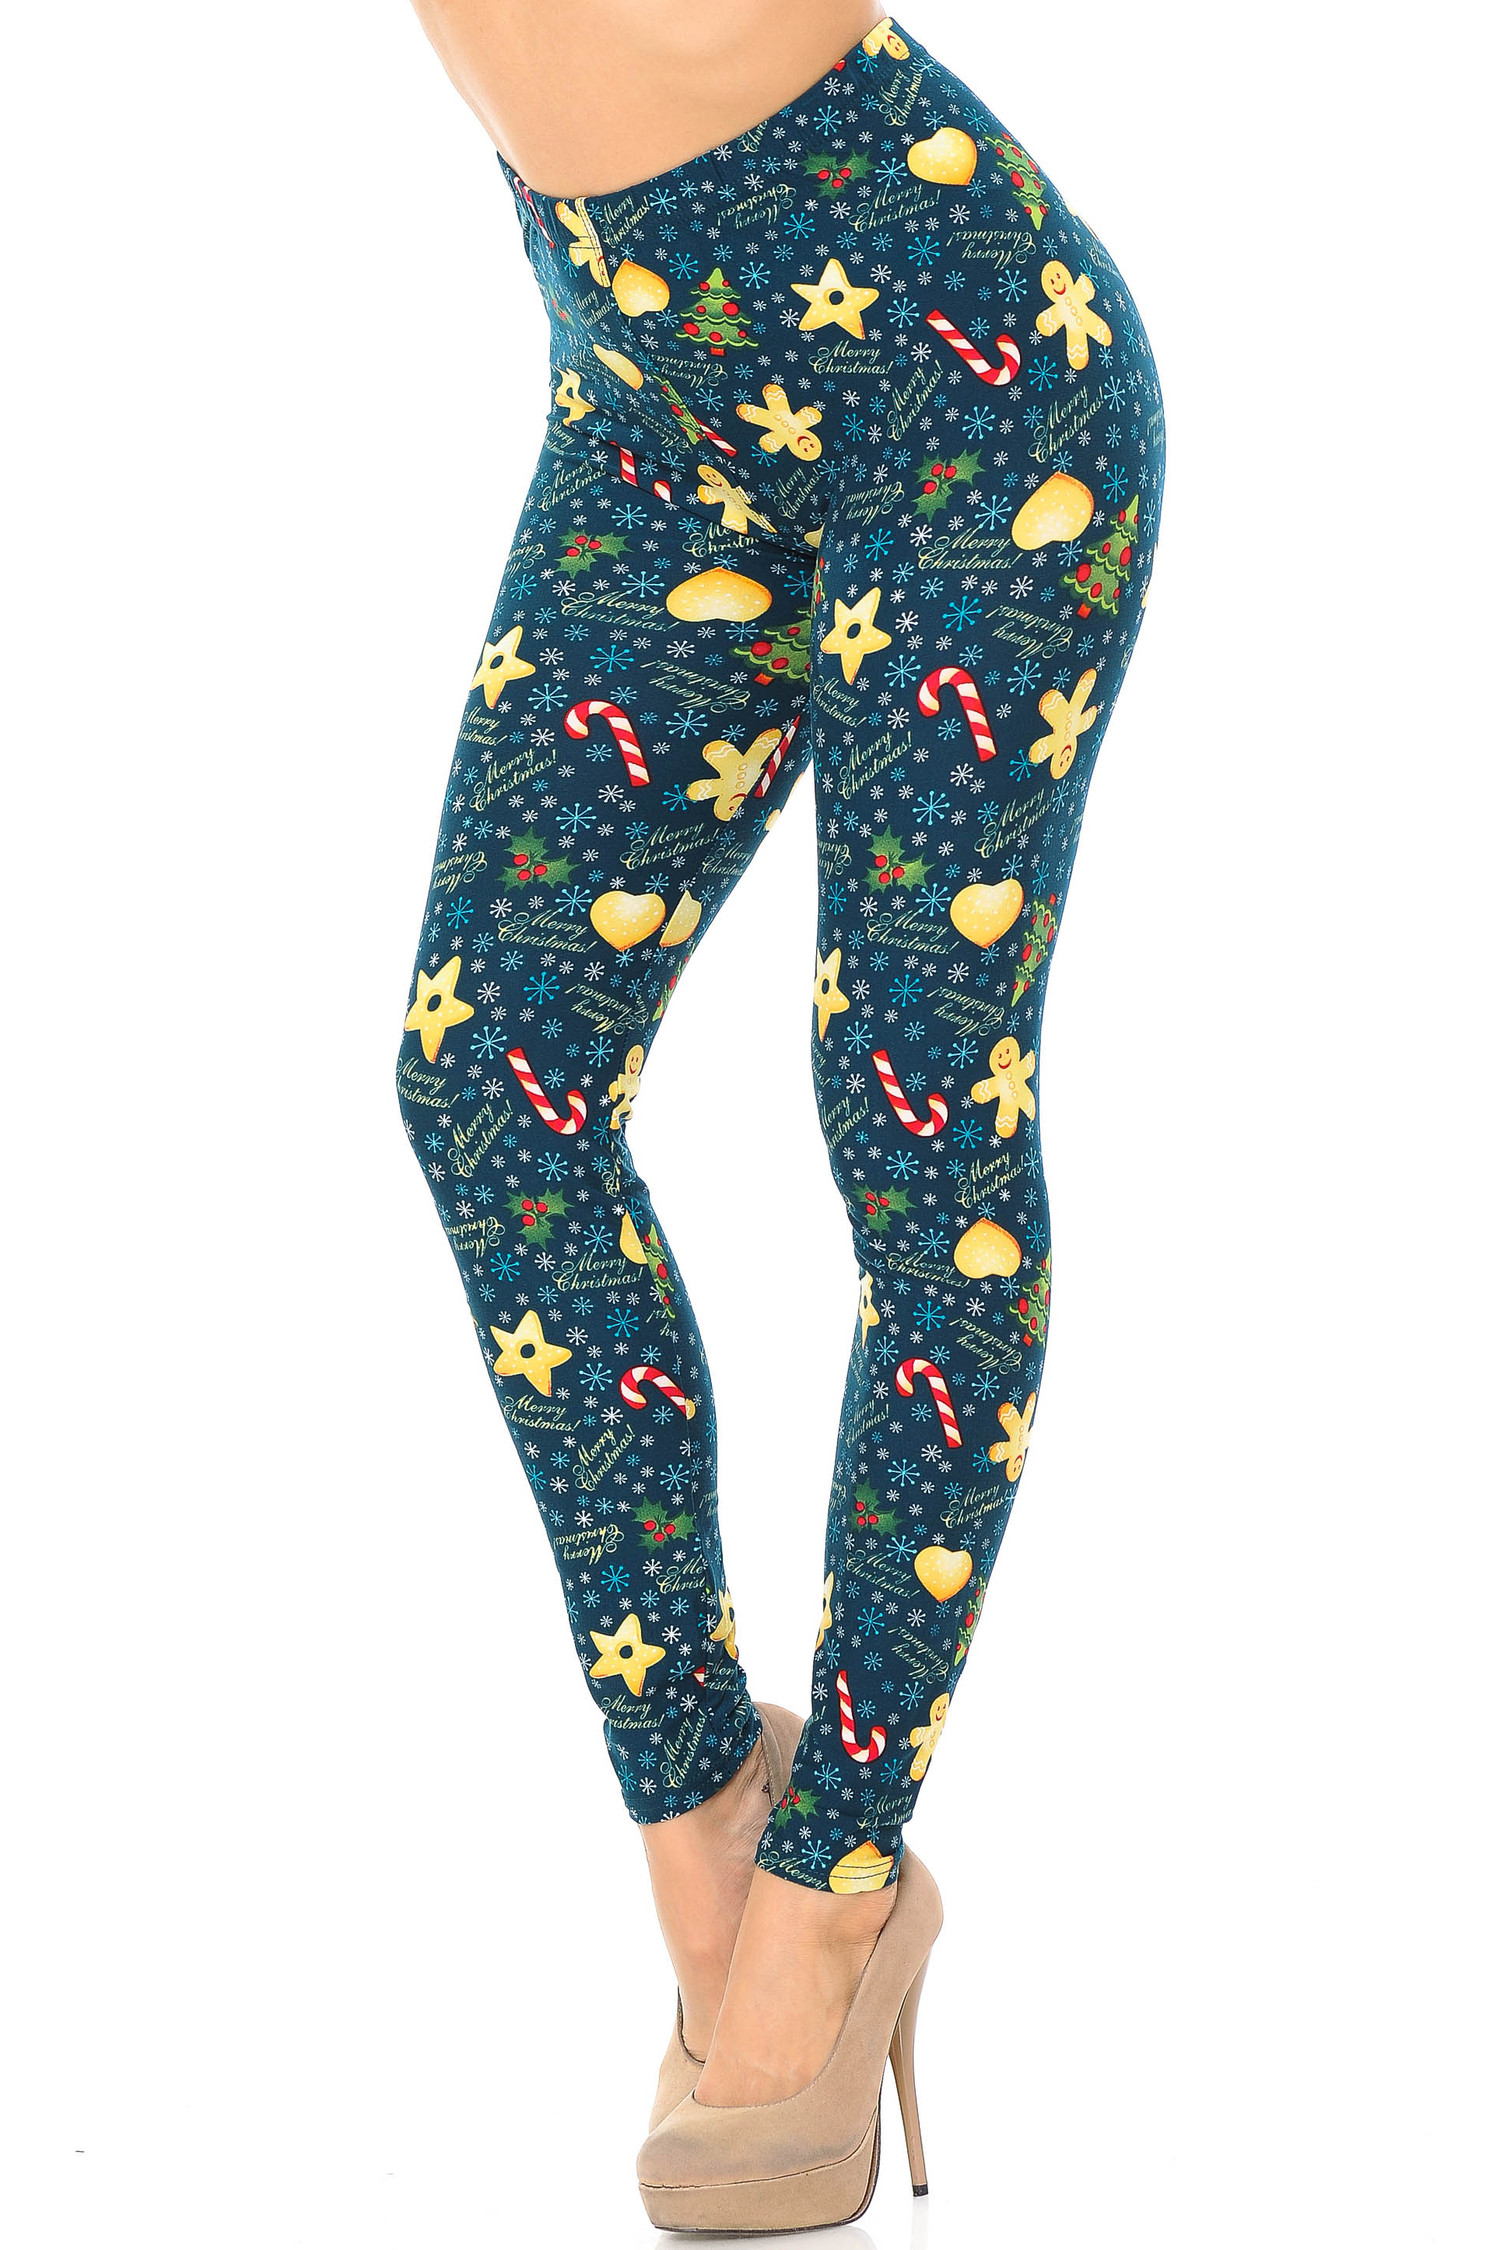  Women's Leggings - 2X / Women's Leggings / Women's Clothing:  Clothing, Shoes & Jewelry